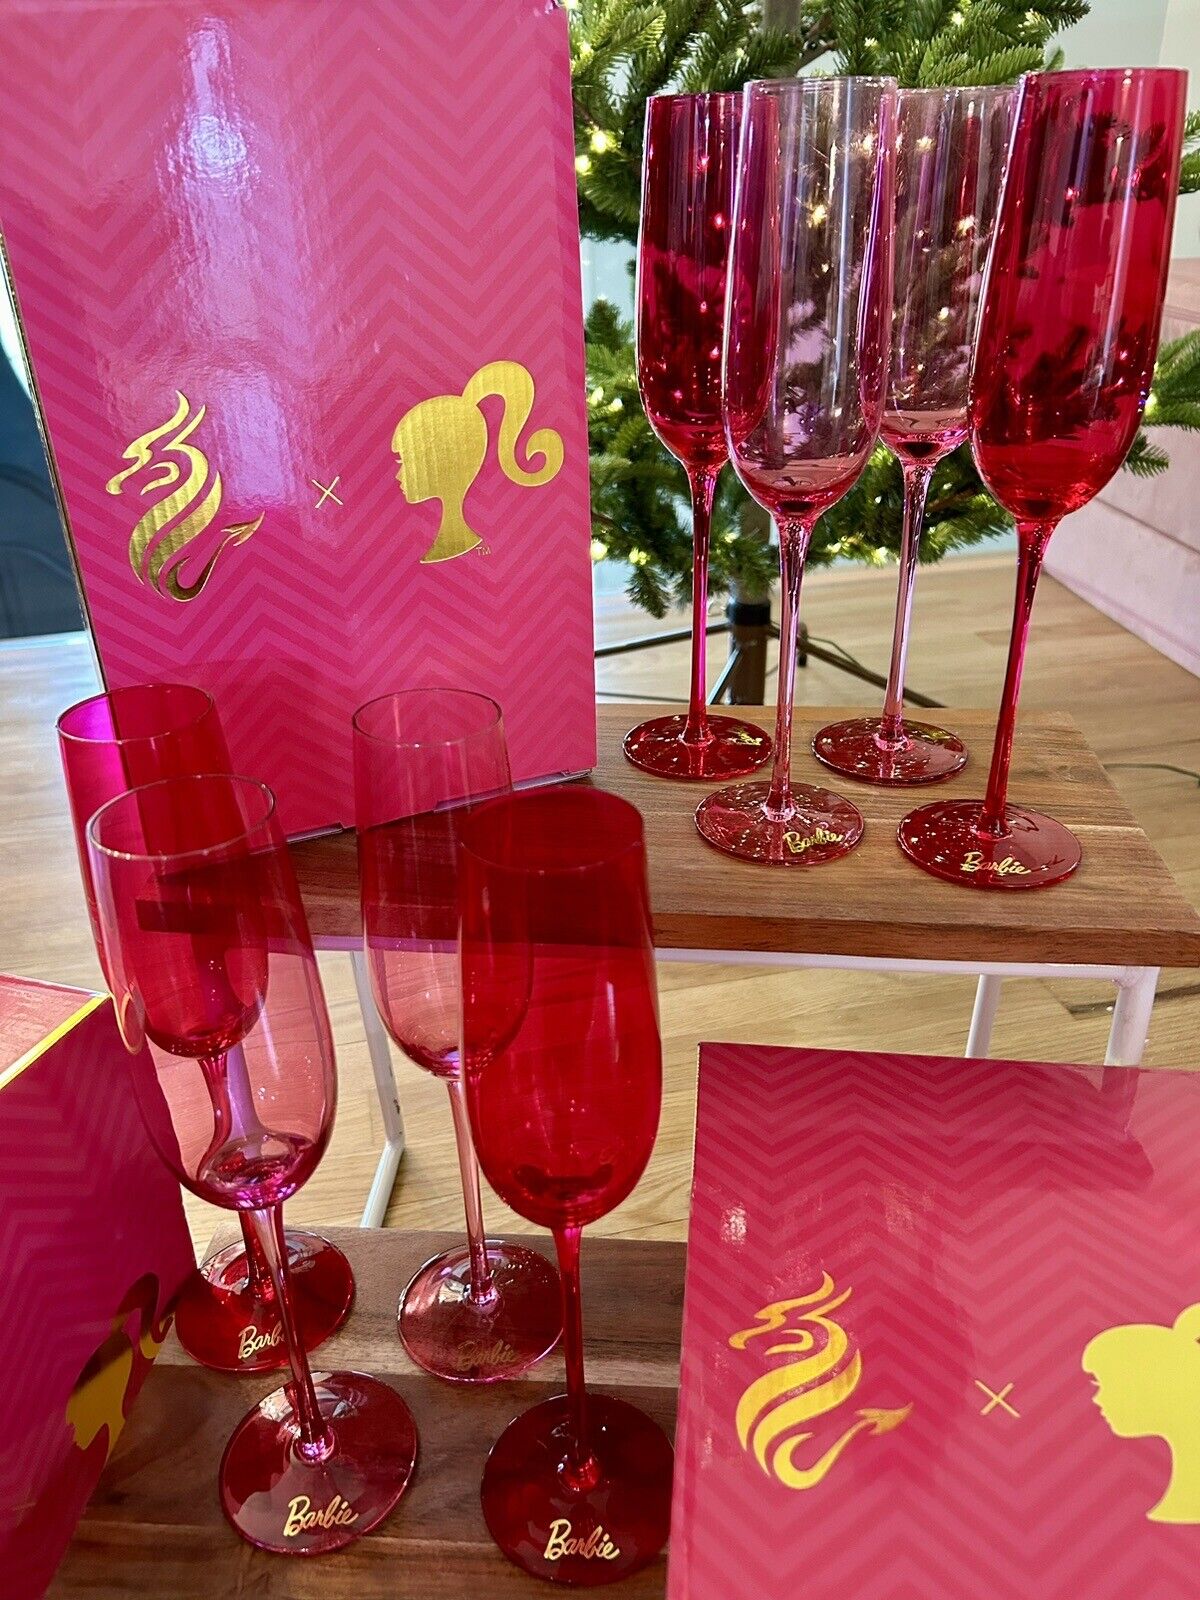 💕 BARBIE™ X DRAGON GLASSWARE® CHAMPAGNE FLUTES NEW WITH BOX SET OF 2 PINK 💕